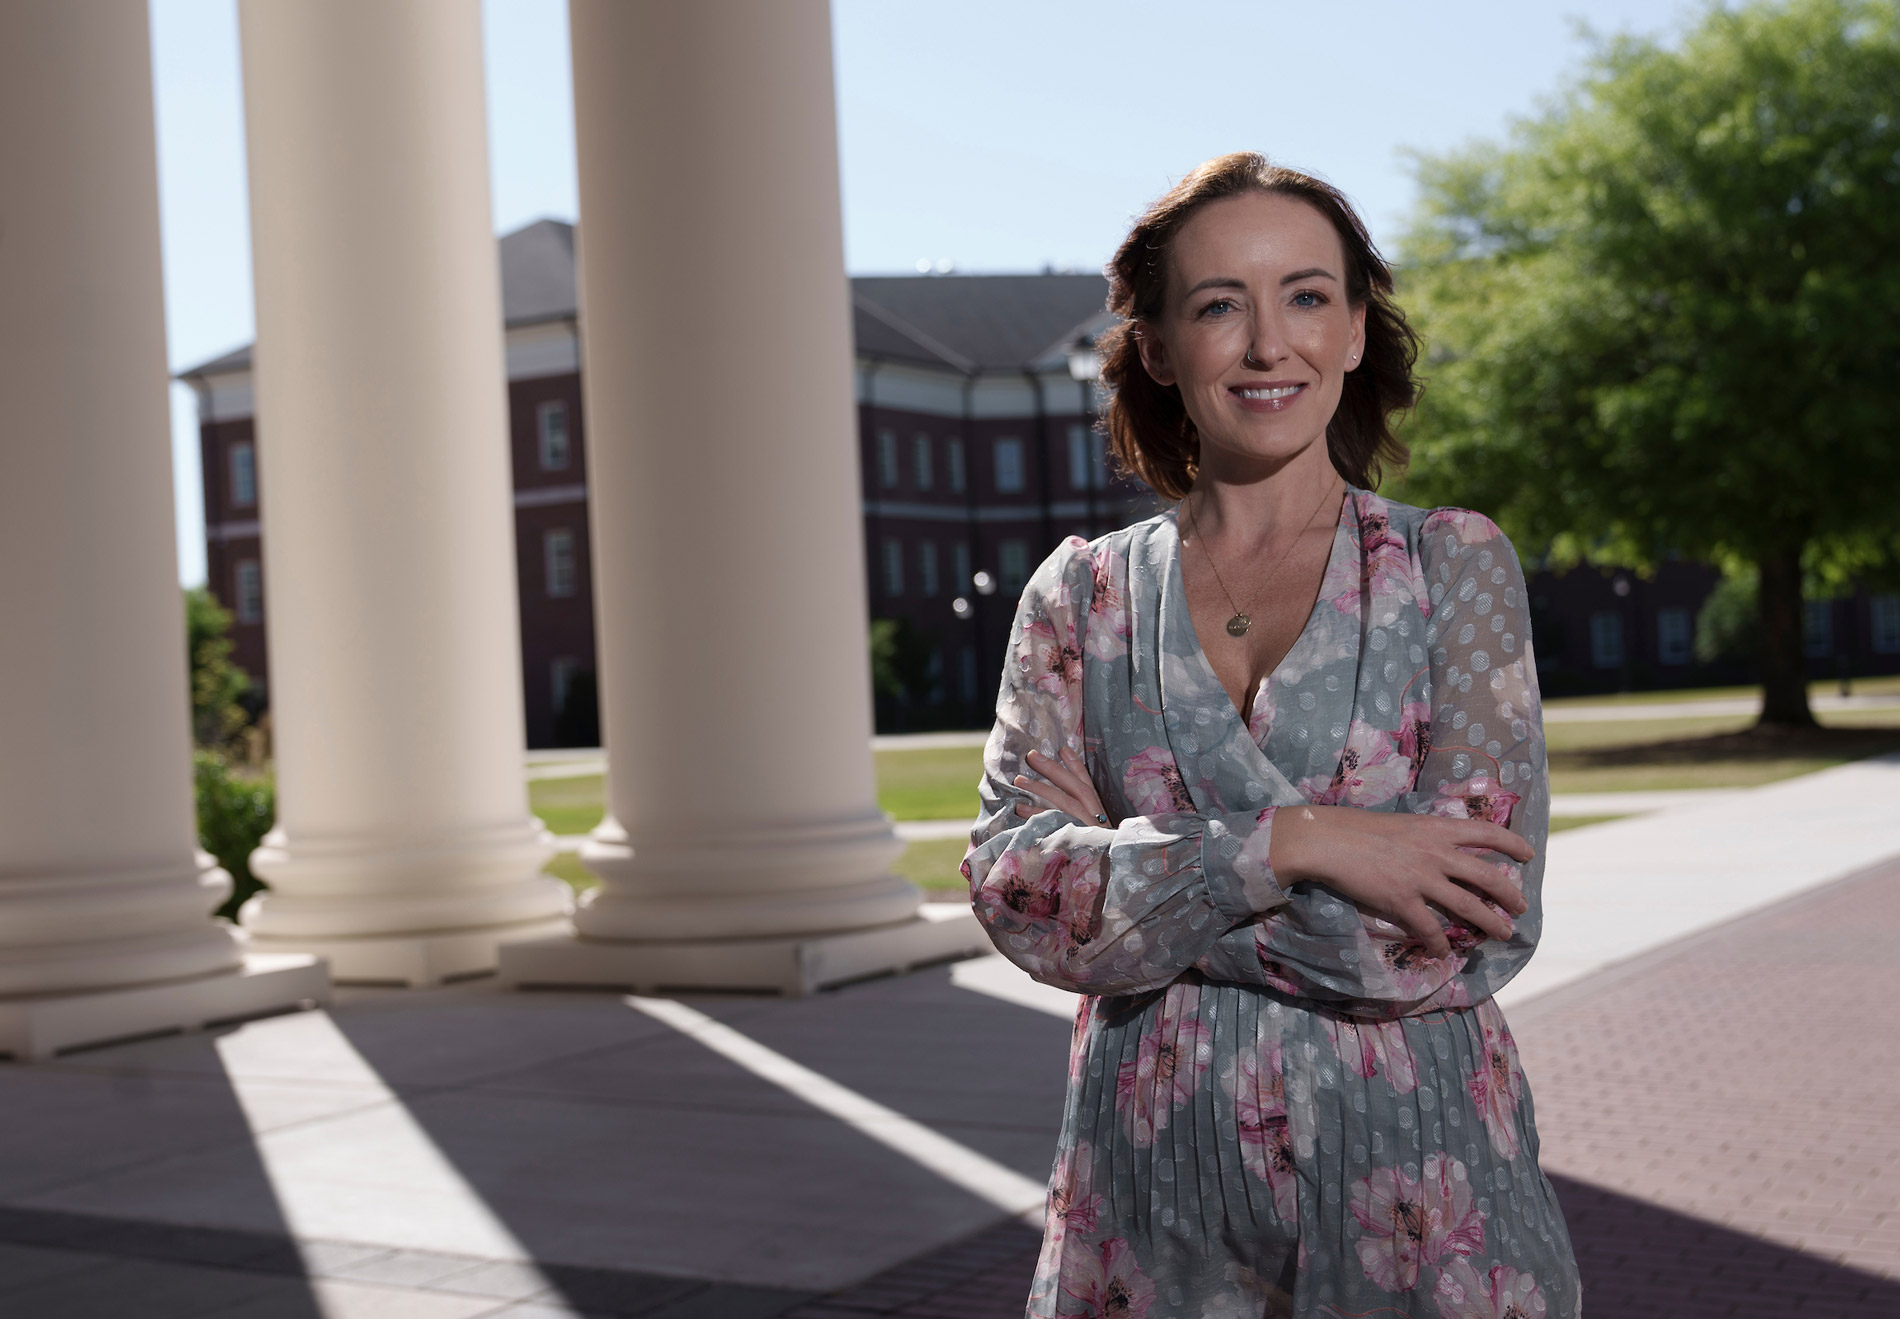  Leanne Churchill who had served as a cryptologic linguist, earned a business administration degree with a concentration in marketing strategy and a minor in leadership studies.